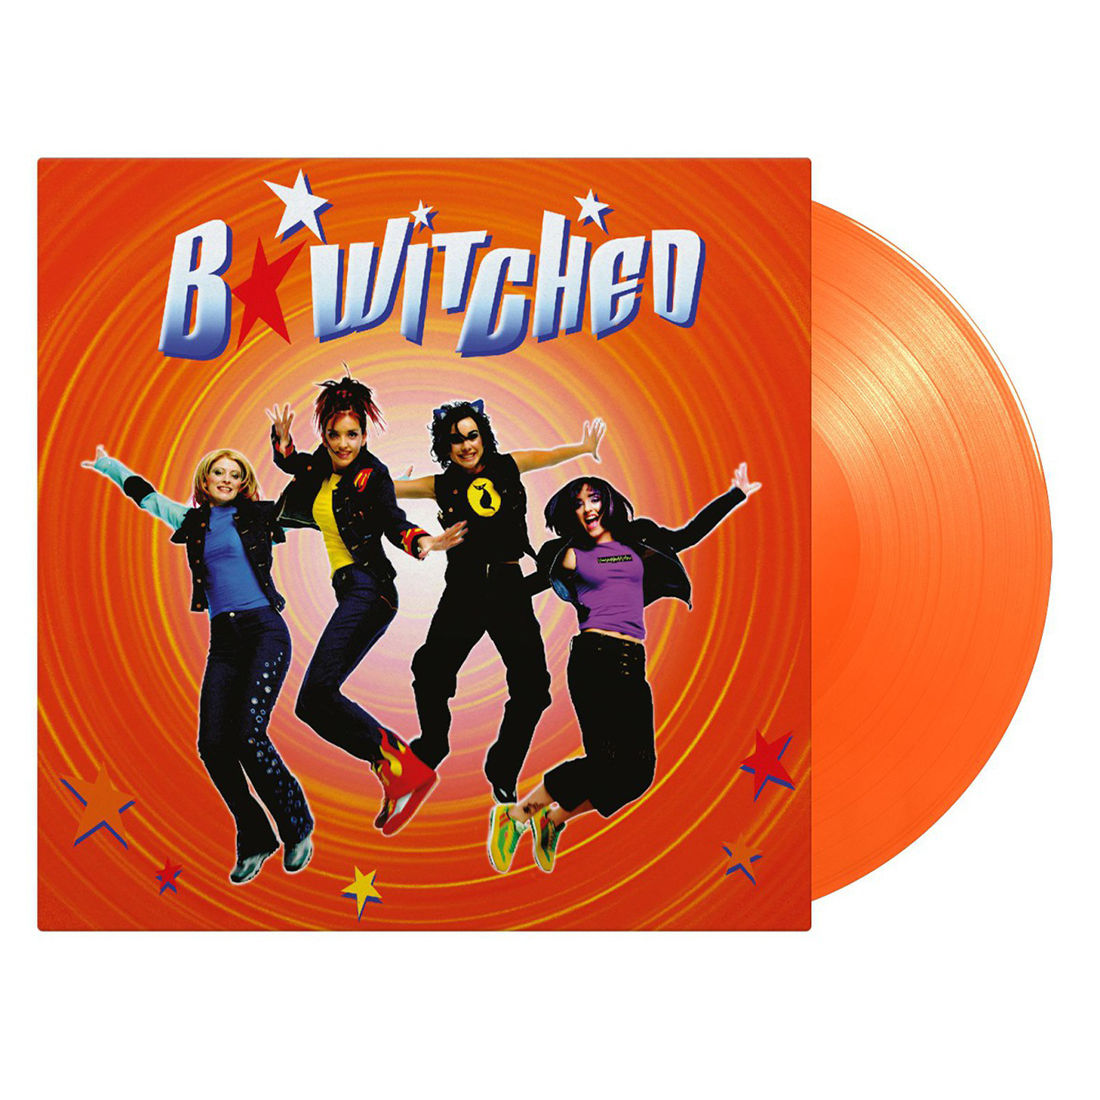 B*Witched: Limited Edition Vinyl LP